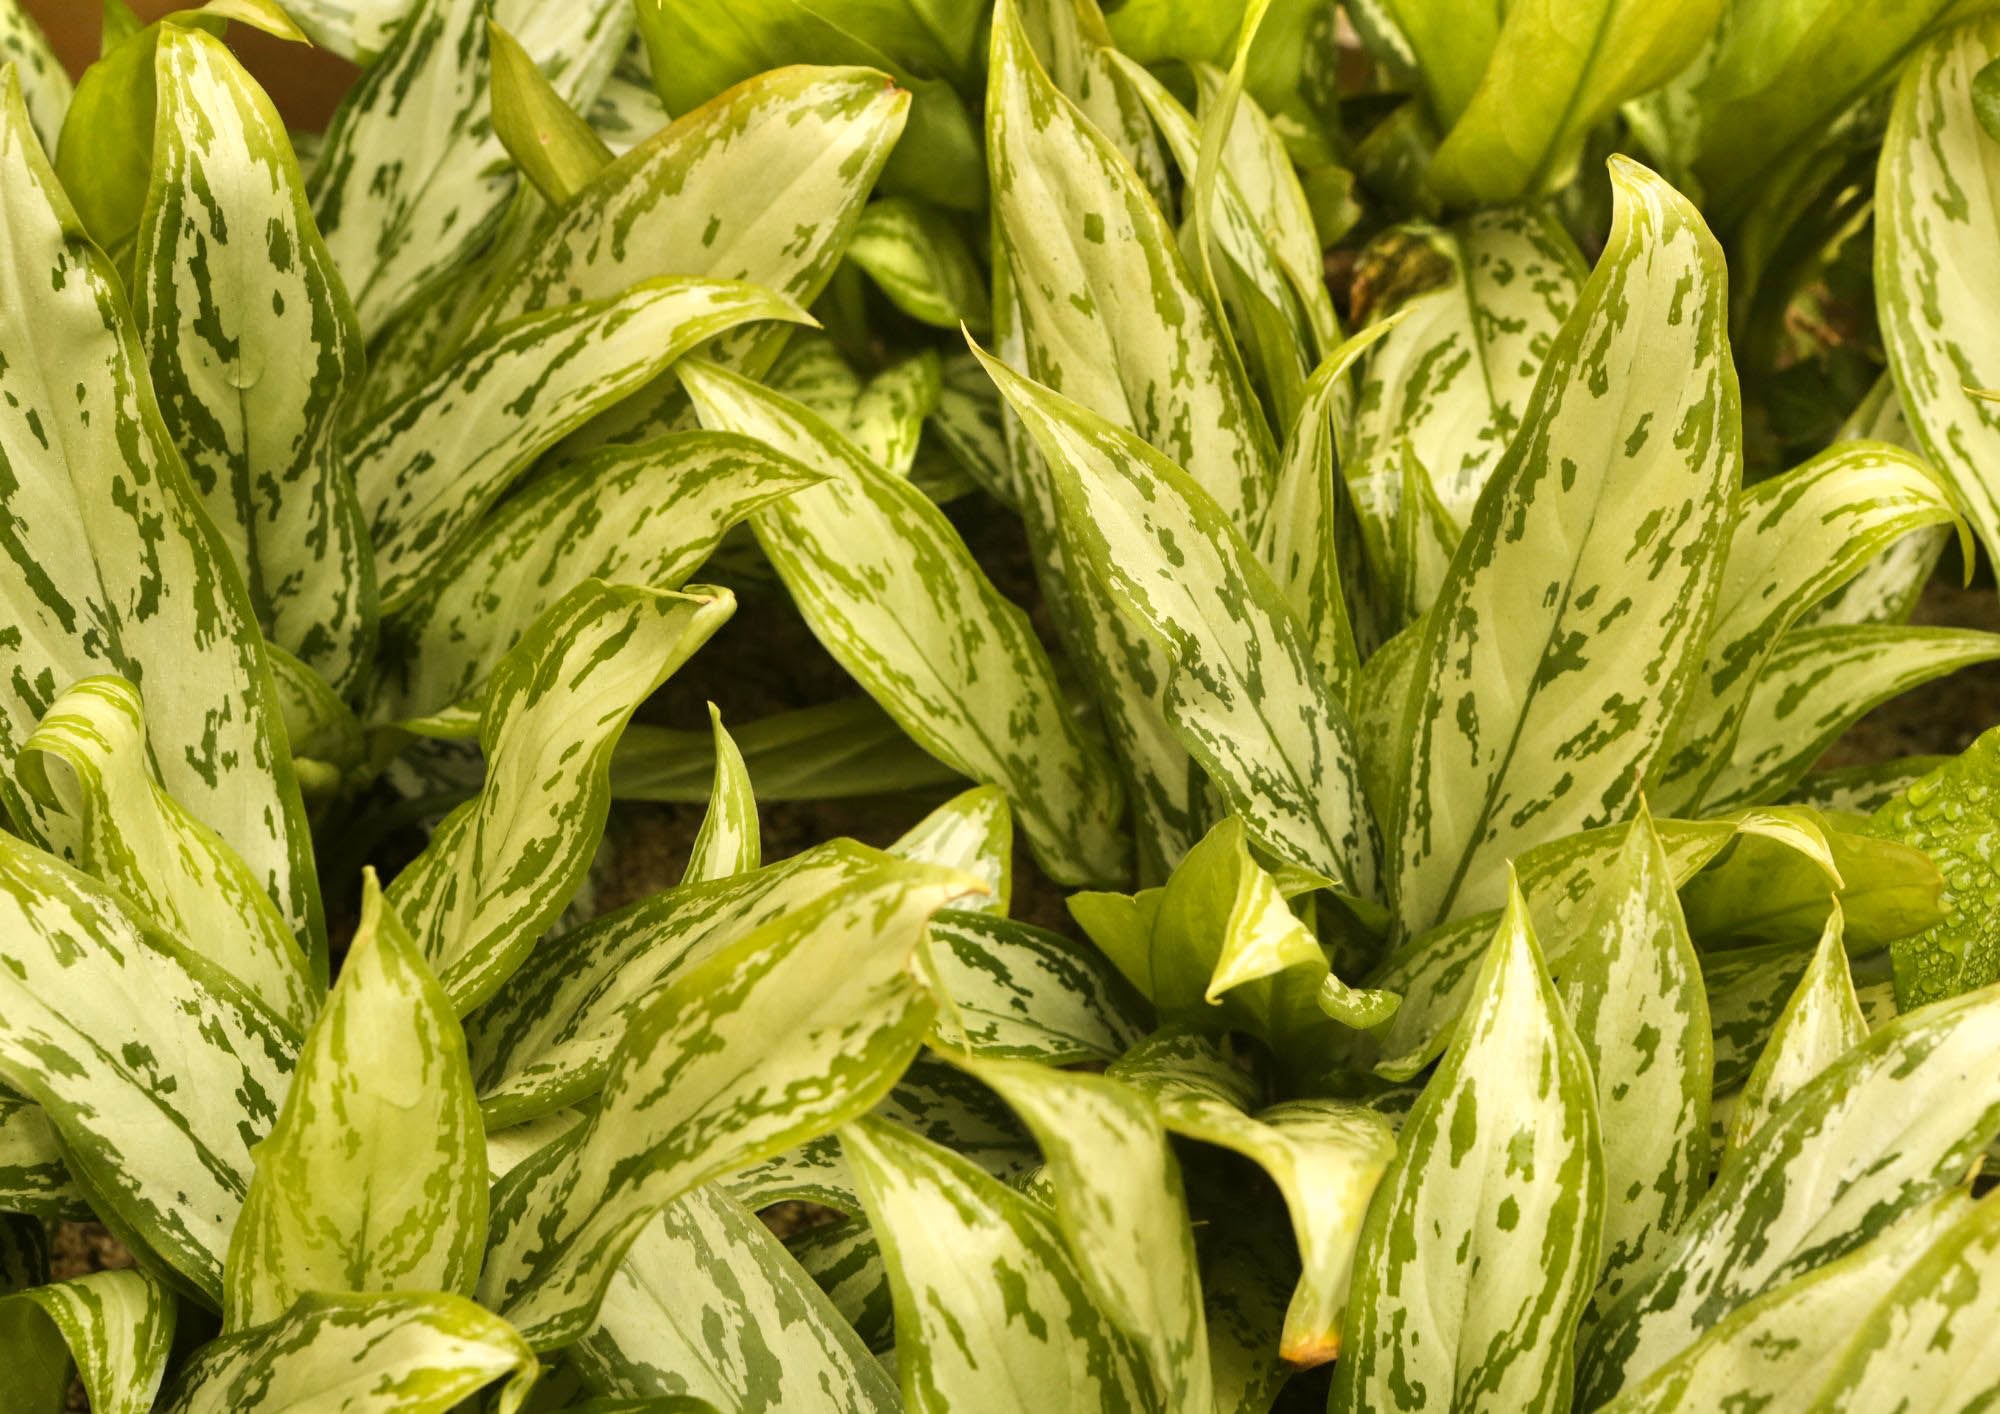 Chinese evergreen plant grown in water